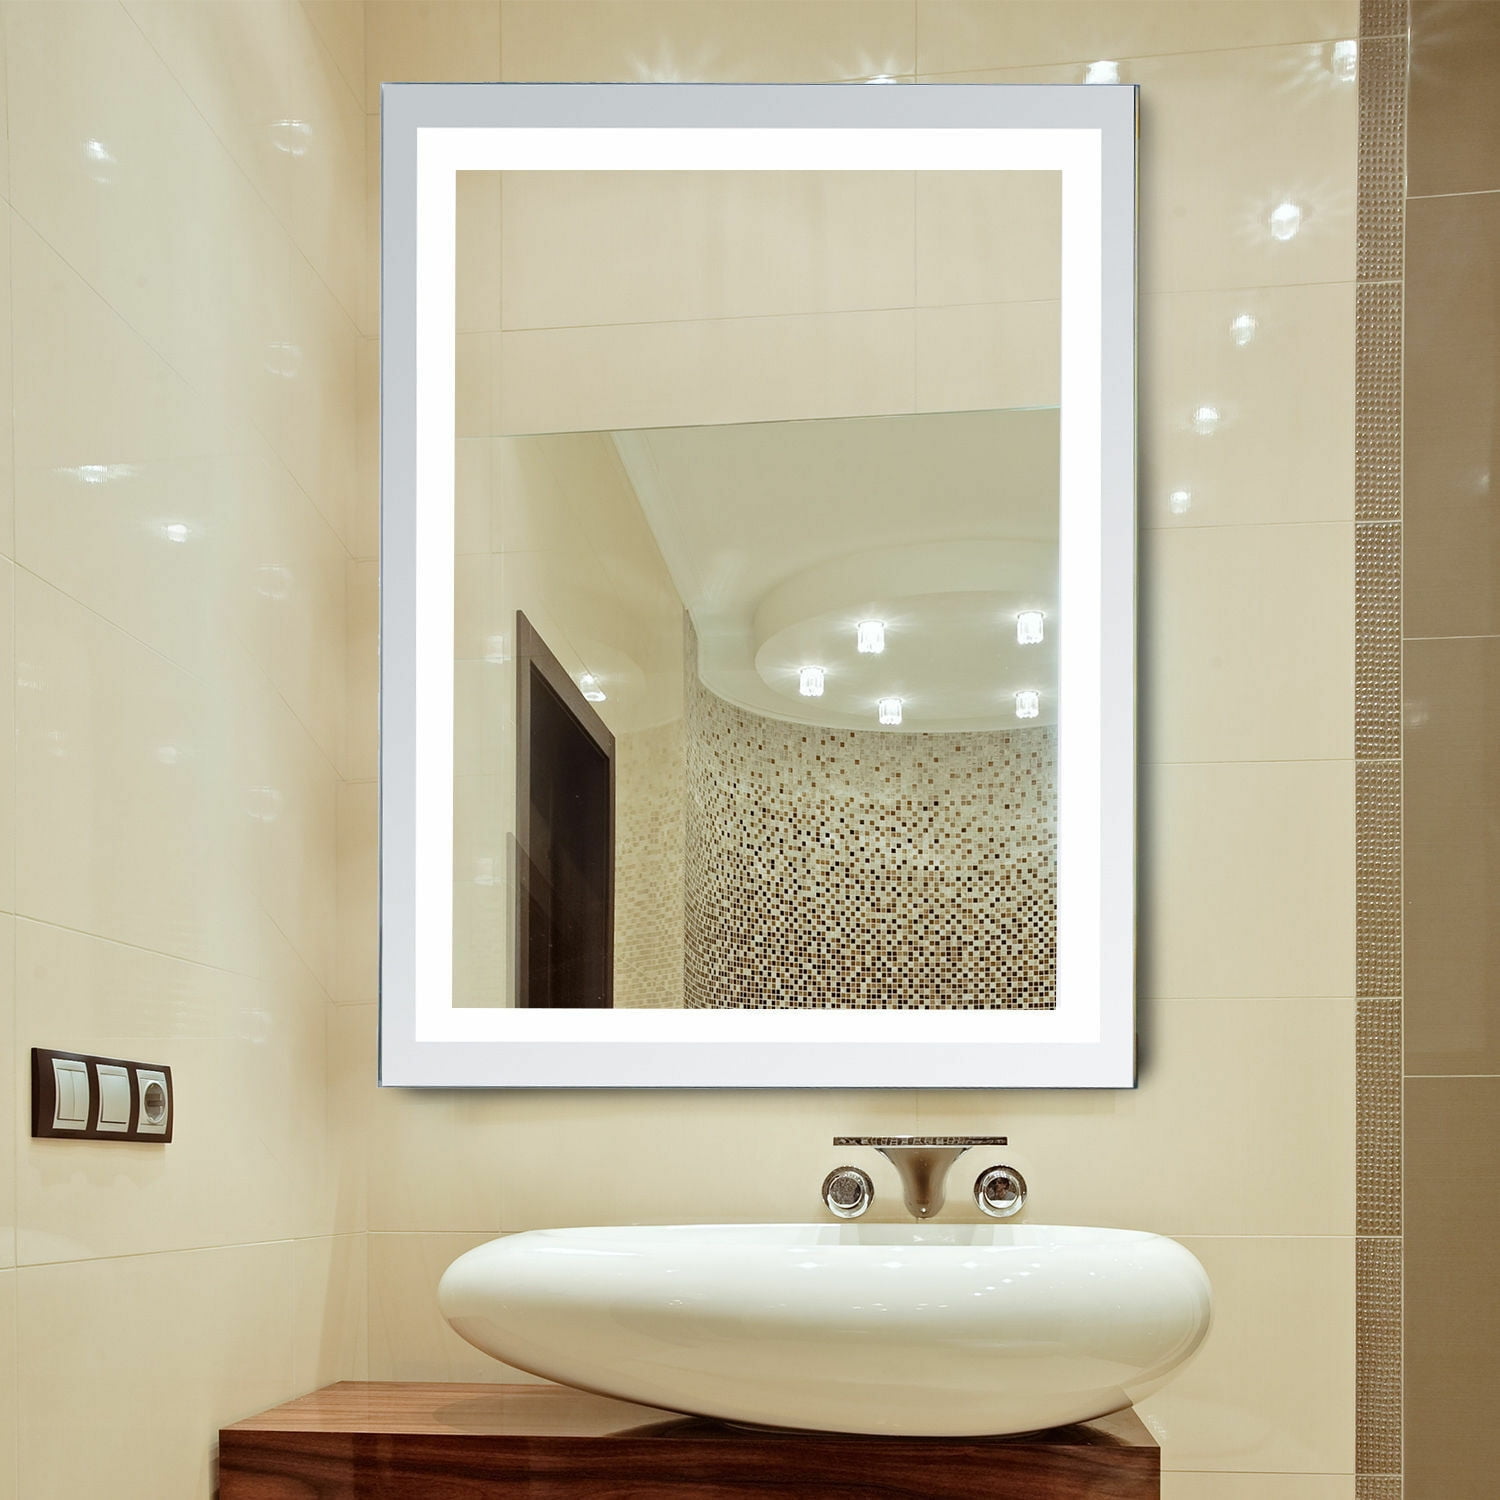 Details about   Bathroom Mirror LED Illuminated Modern Wall Mounted Rectangular Mains Powered 